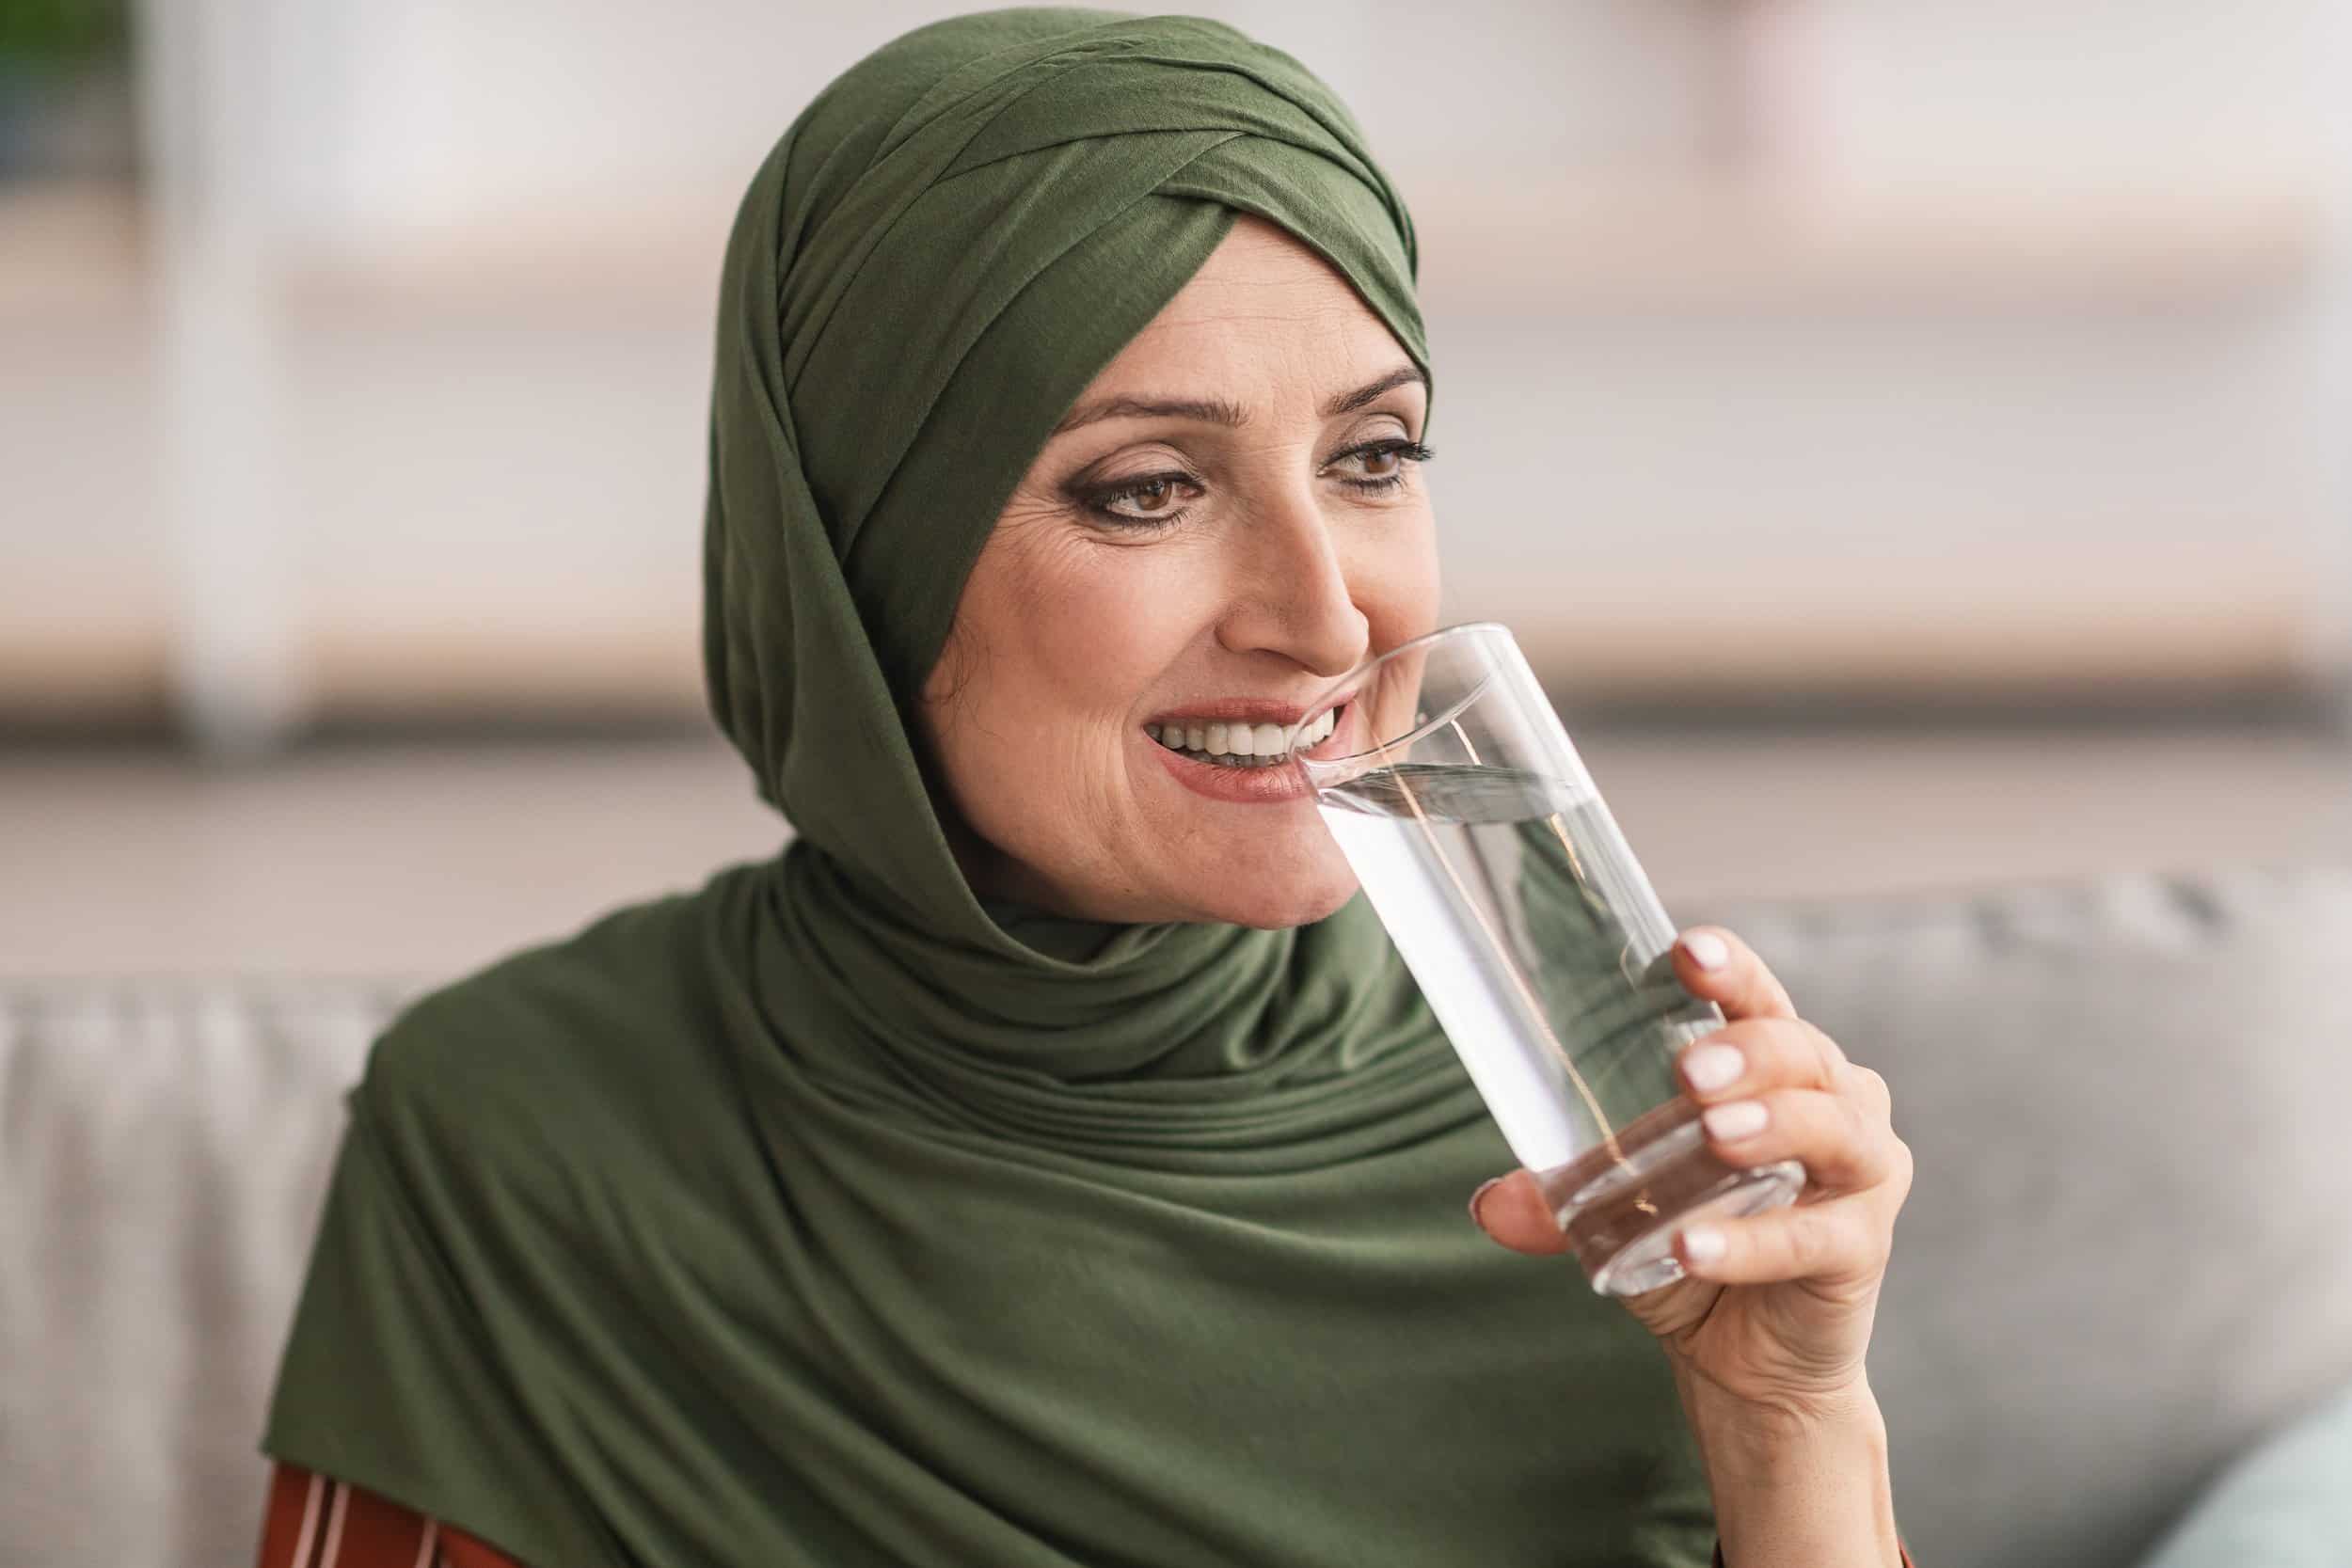 A muslim woman happily drinks water